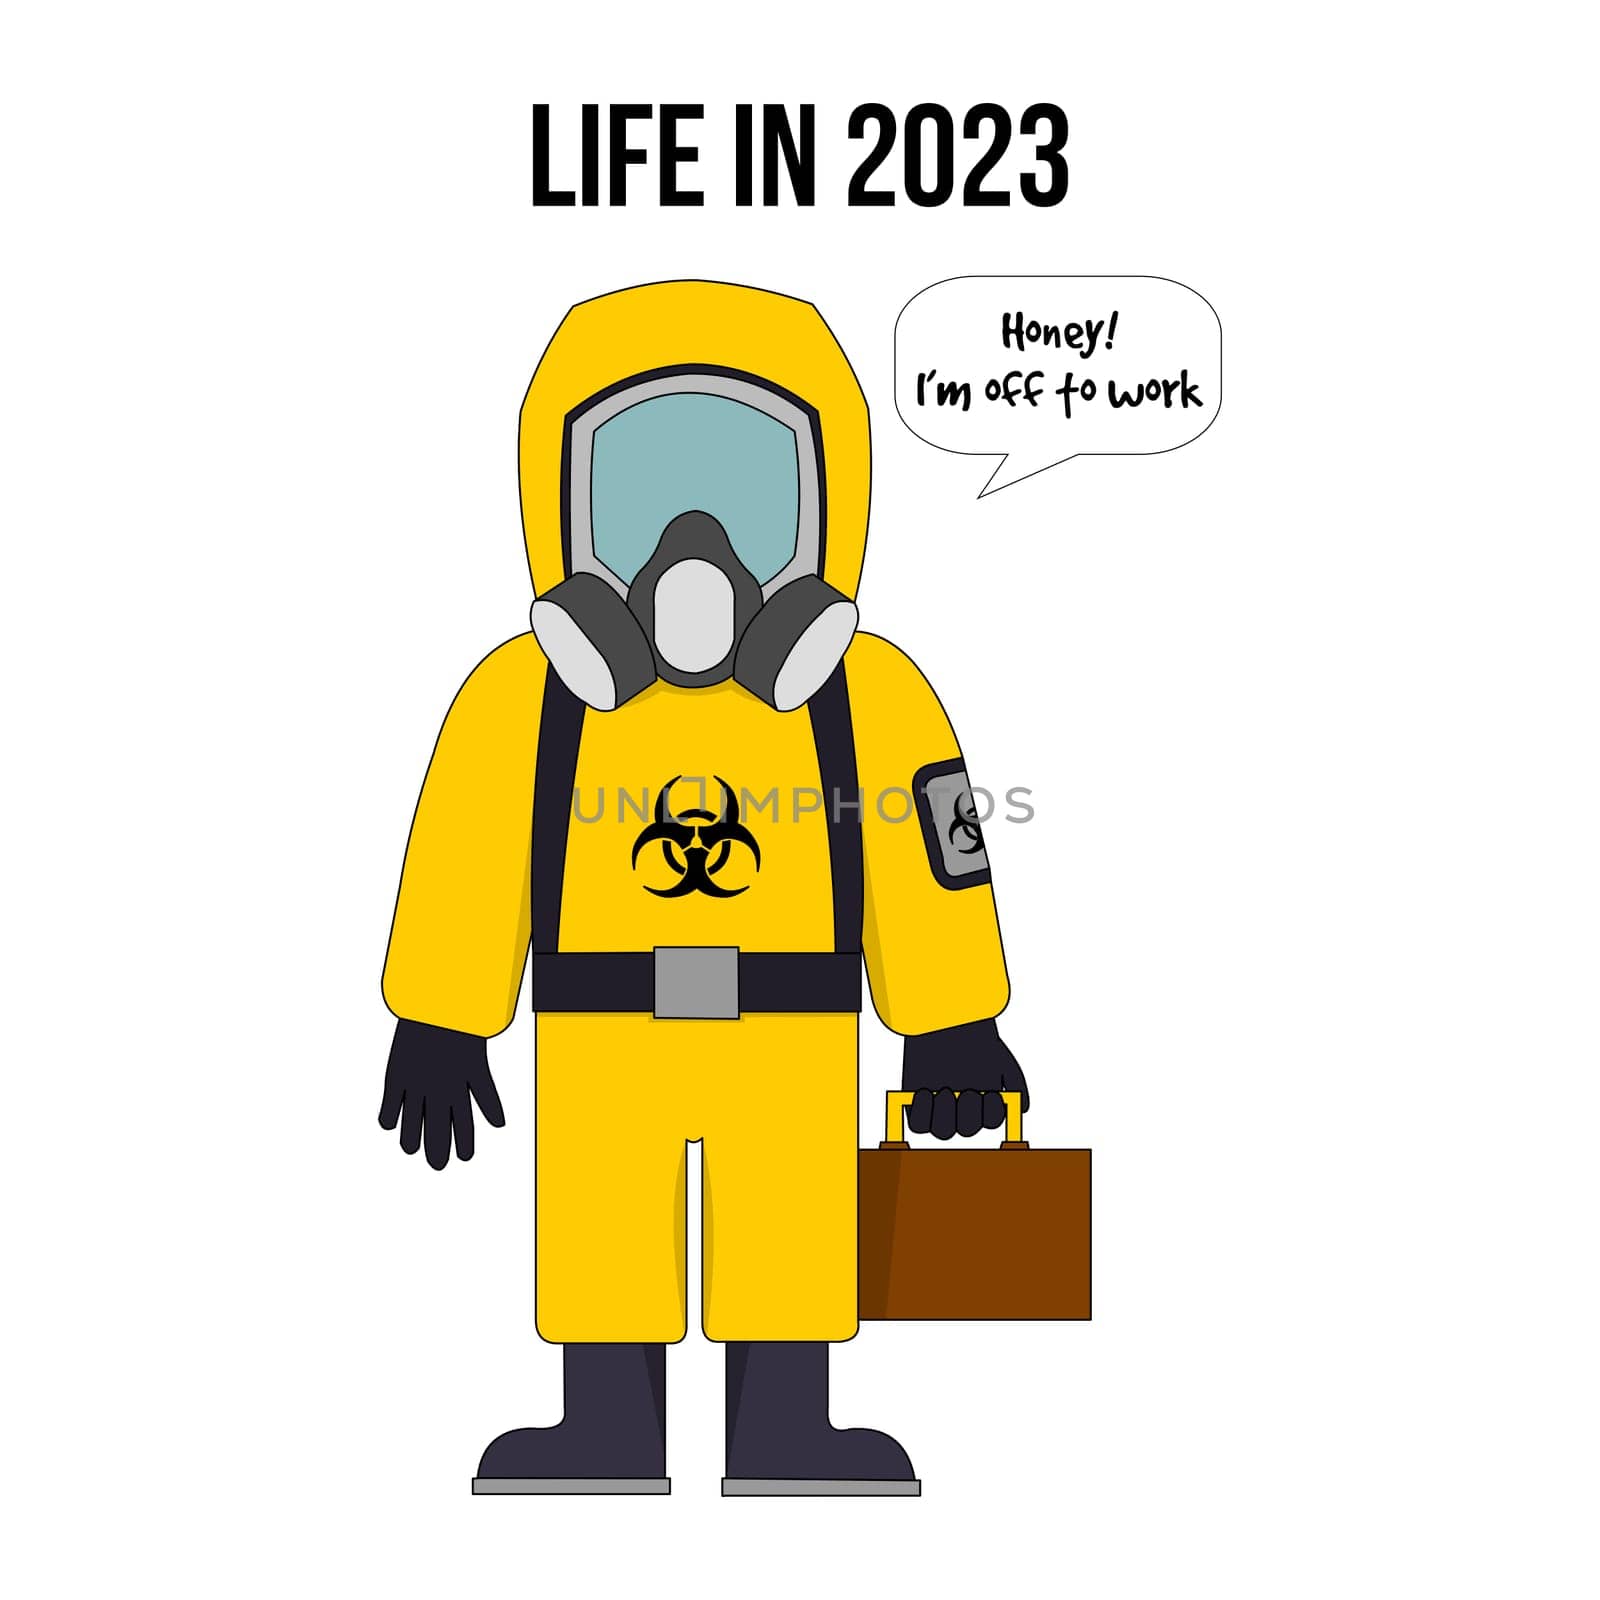 Going to work in 2023 by Bigalbaloo